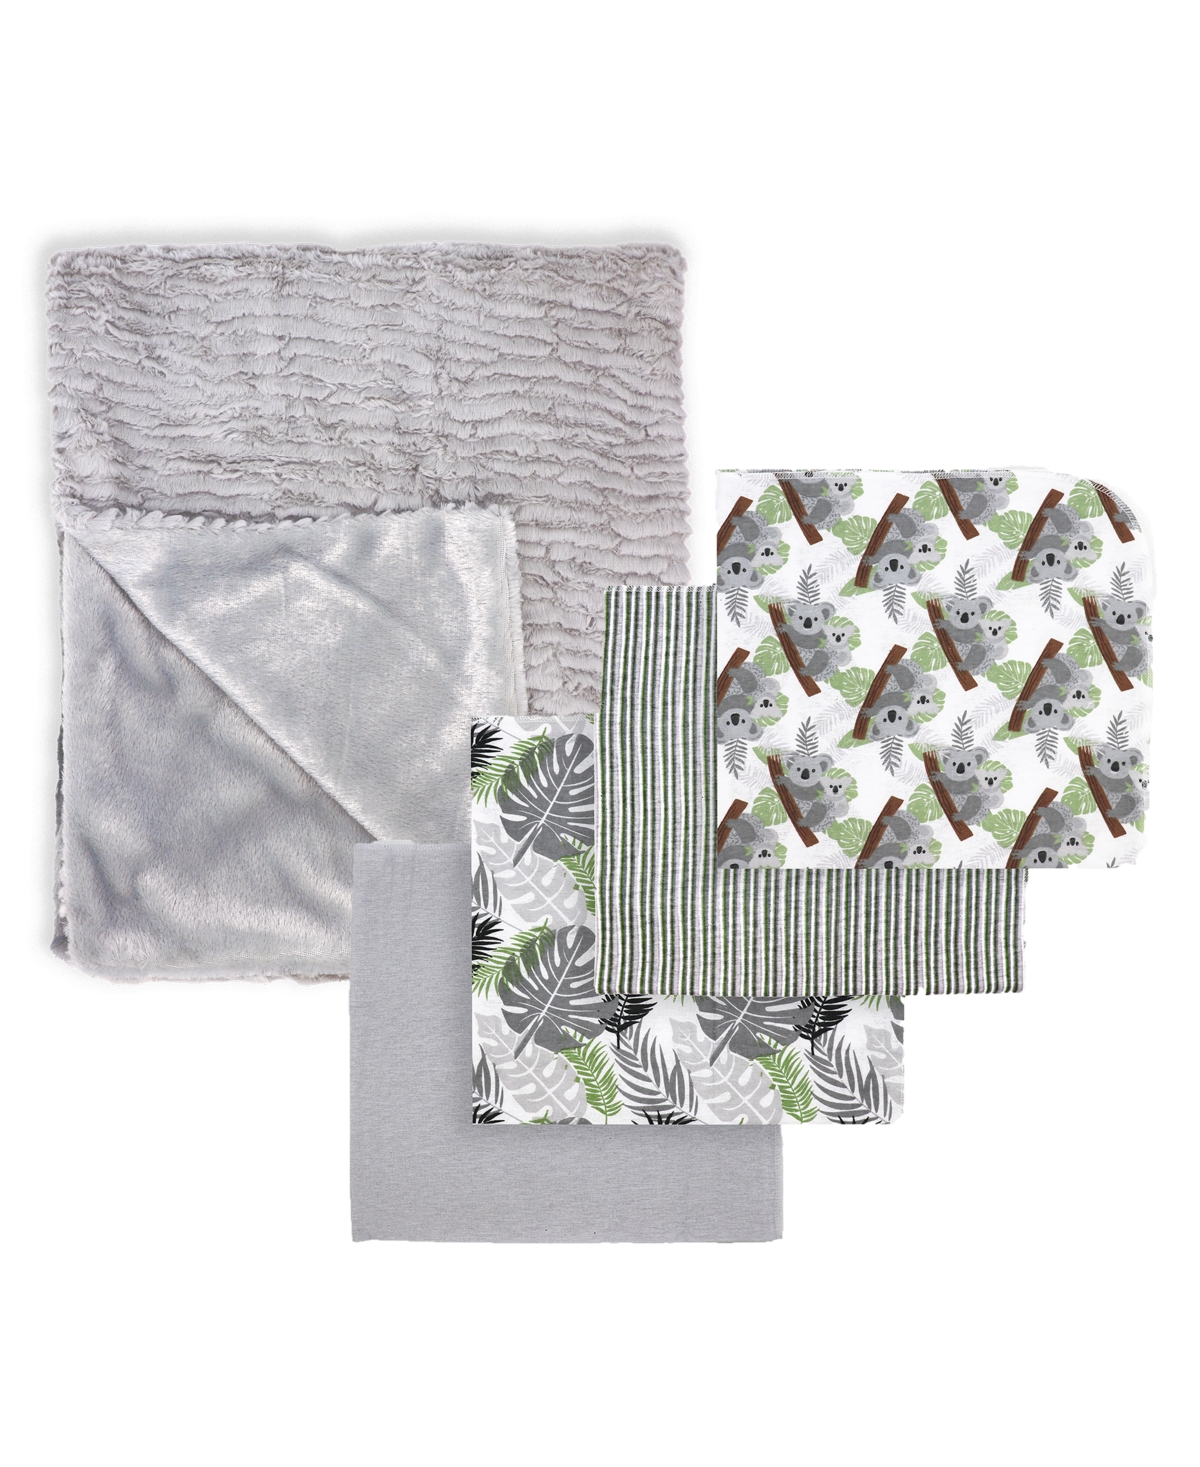 Baby Mode Tendertyme Baby Boys Or Baby Girls Tropical Islands Baby Blankets, 5 Piece Gift Set In Gray